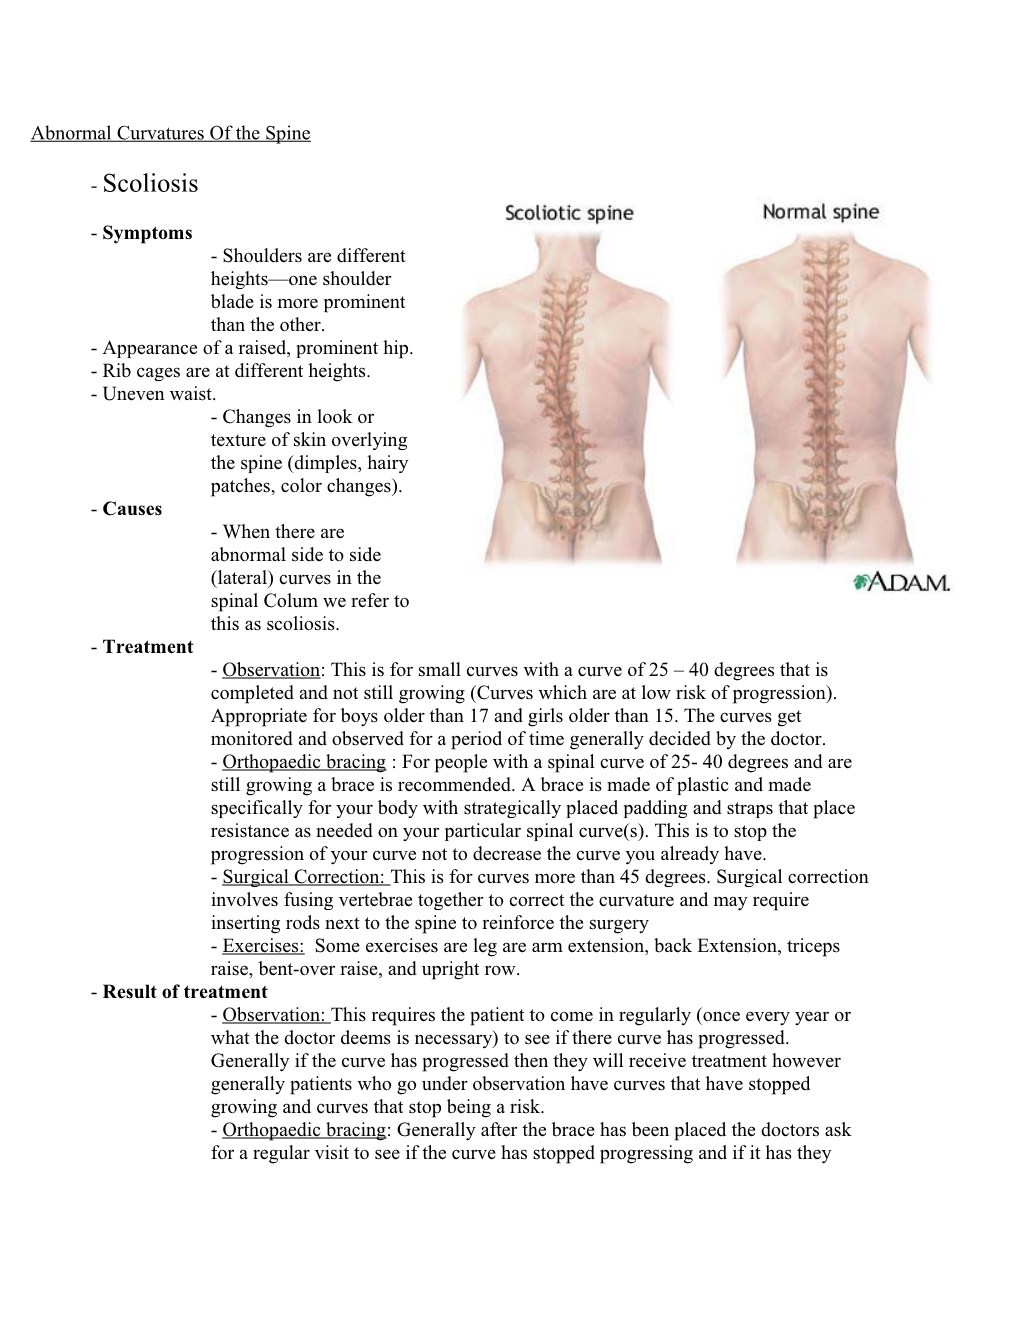 Abnormal Curvatures of the Spine